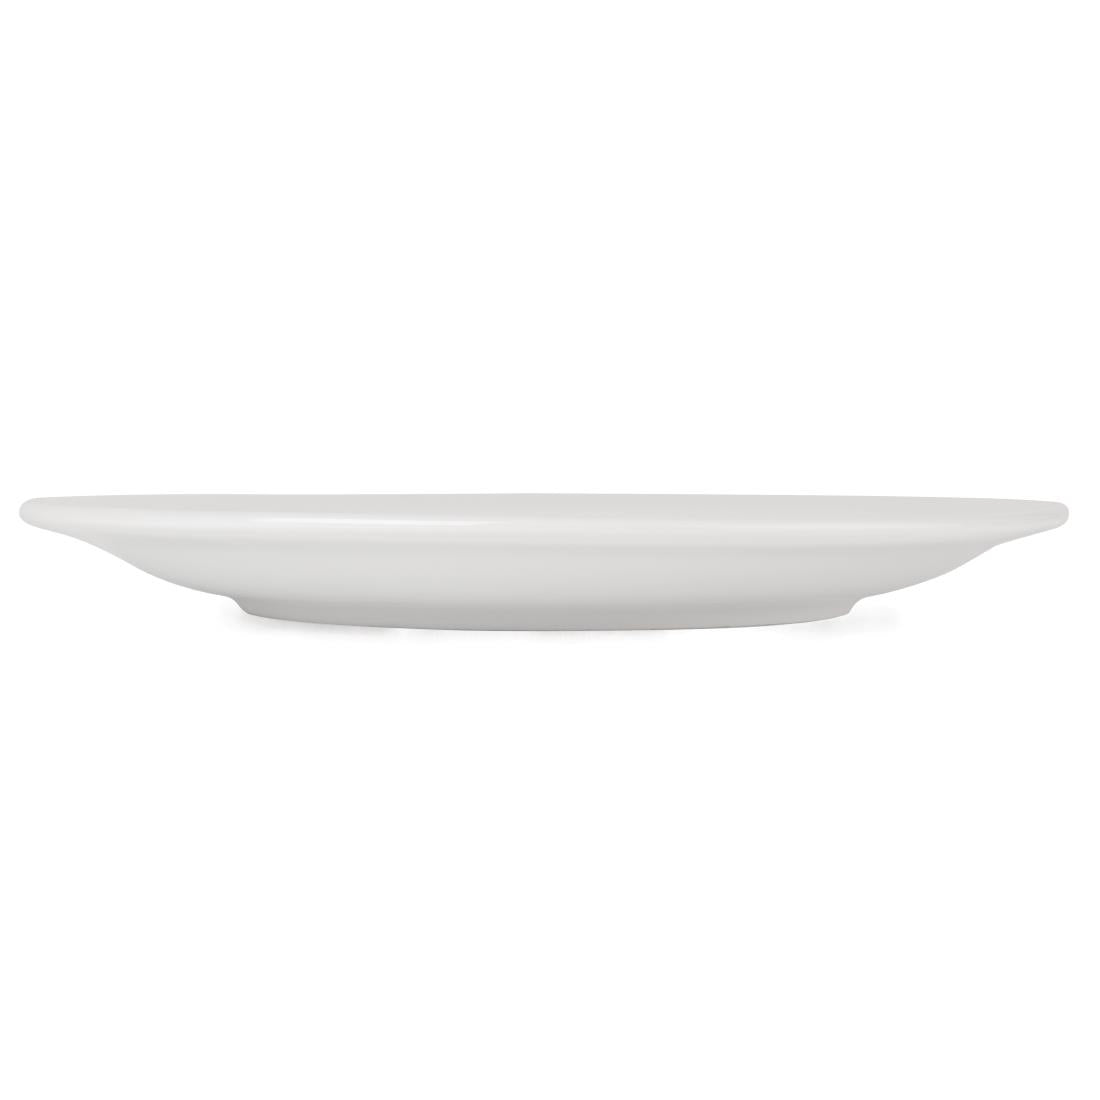 Athena Hotelware Narrow Rimmed Plates 284mm (Pack of 6) JD Catering Equipment Solutions Ltd